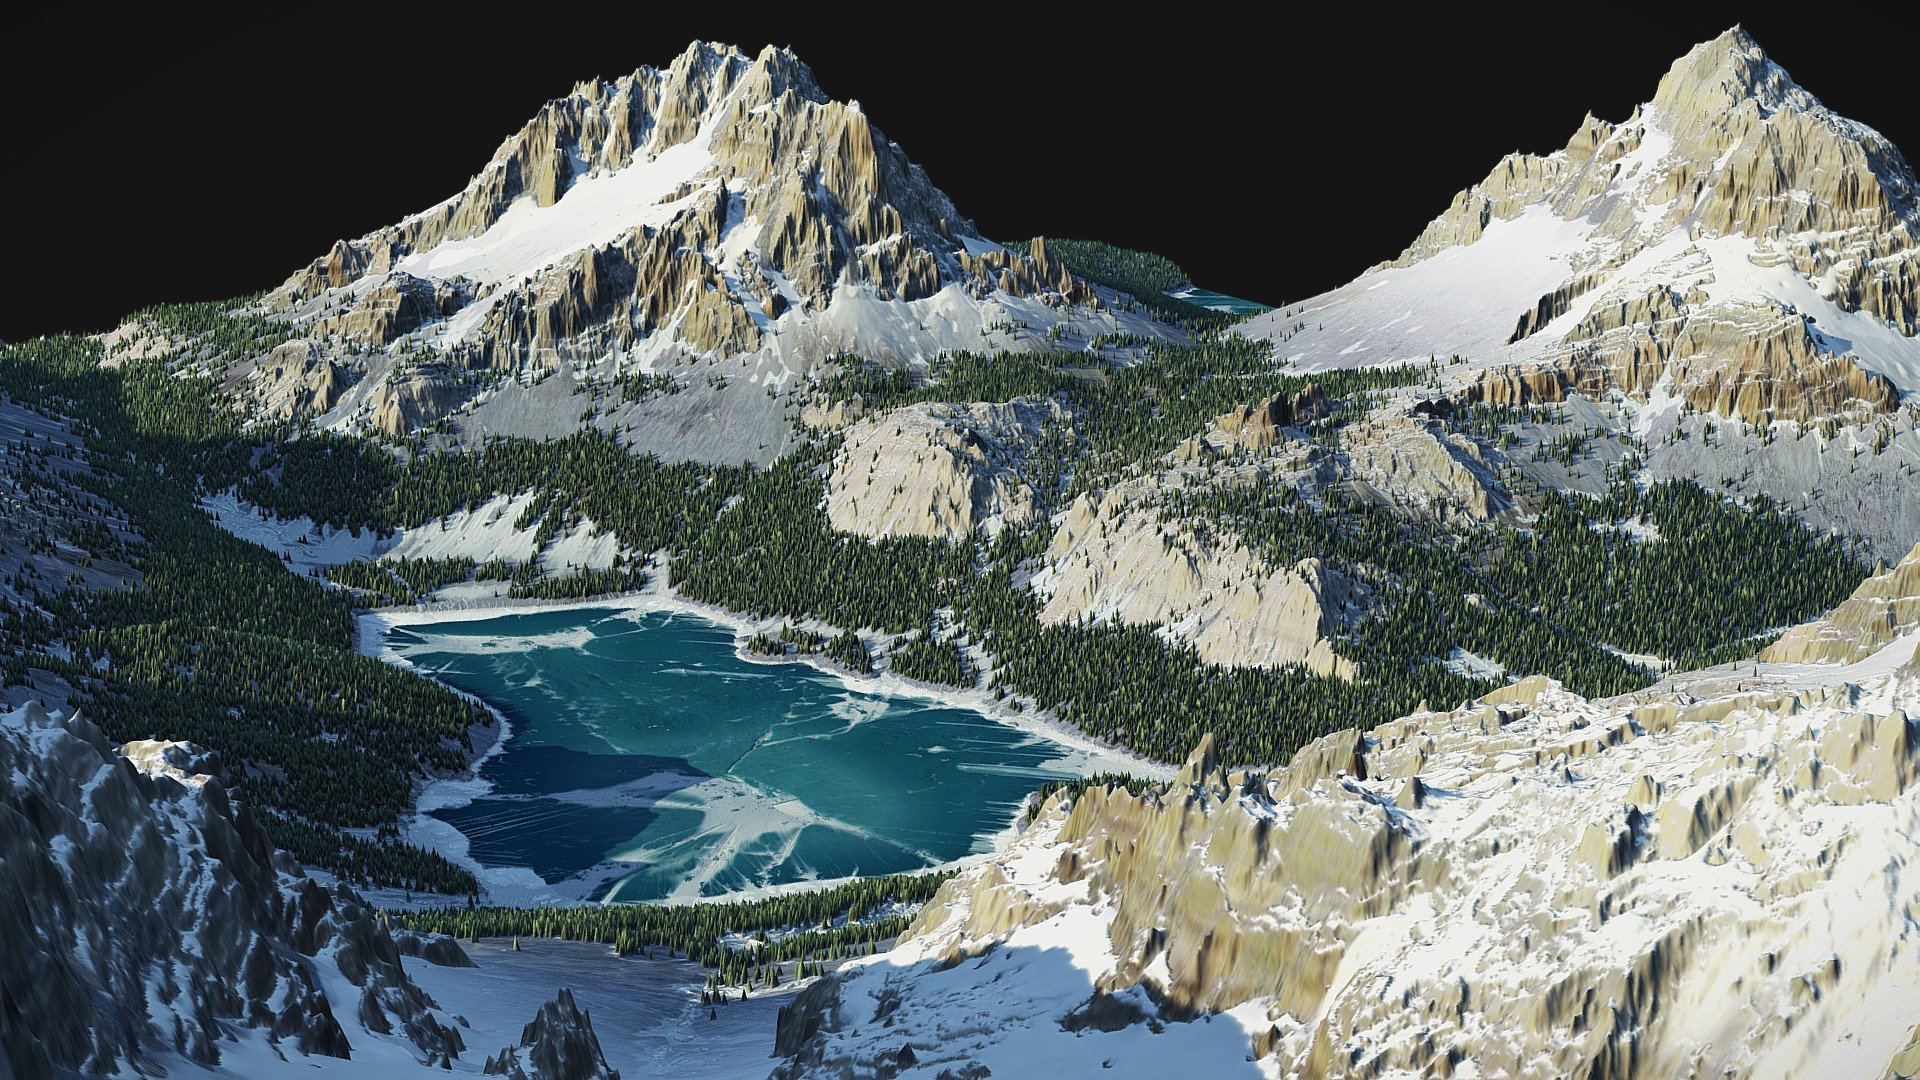 Fully Procedural Landscape created in World Machine. Inspired by winter.

included 4k textures - COLOR  NORMAL  LIGHT

You can buy it here - https://sketchfab.com/3d-models/mountain-lake-world-machine-d9be312728e34014a00d03e1faa46dda

Other assets on https://gamewarming.com/ - Mountain Lake Landscape - (World Machine) - 3D model by gamewarming 3d model